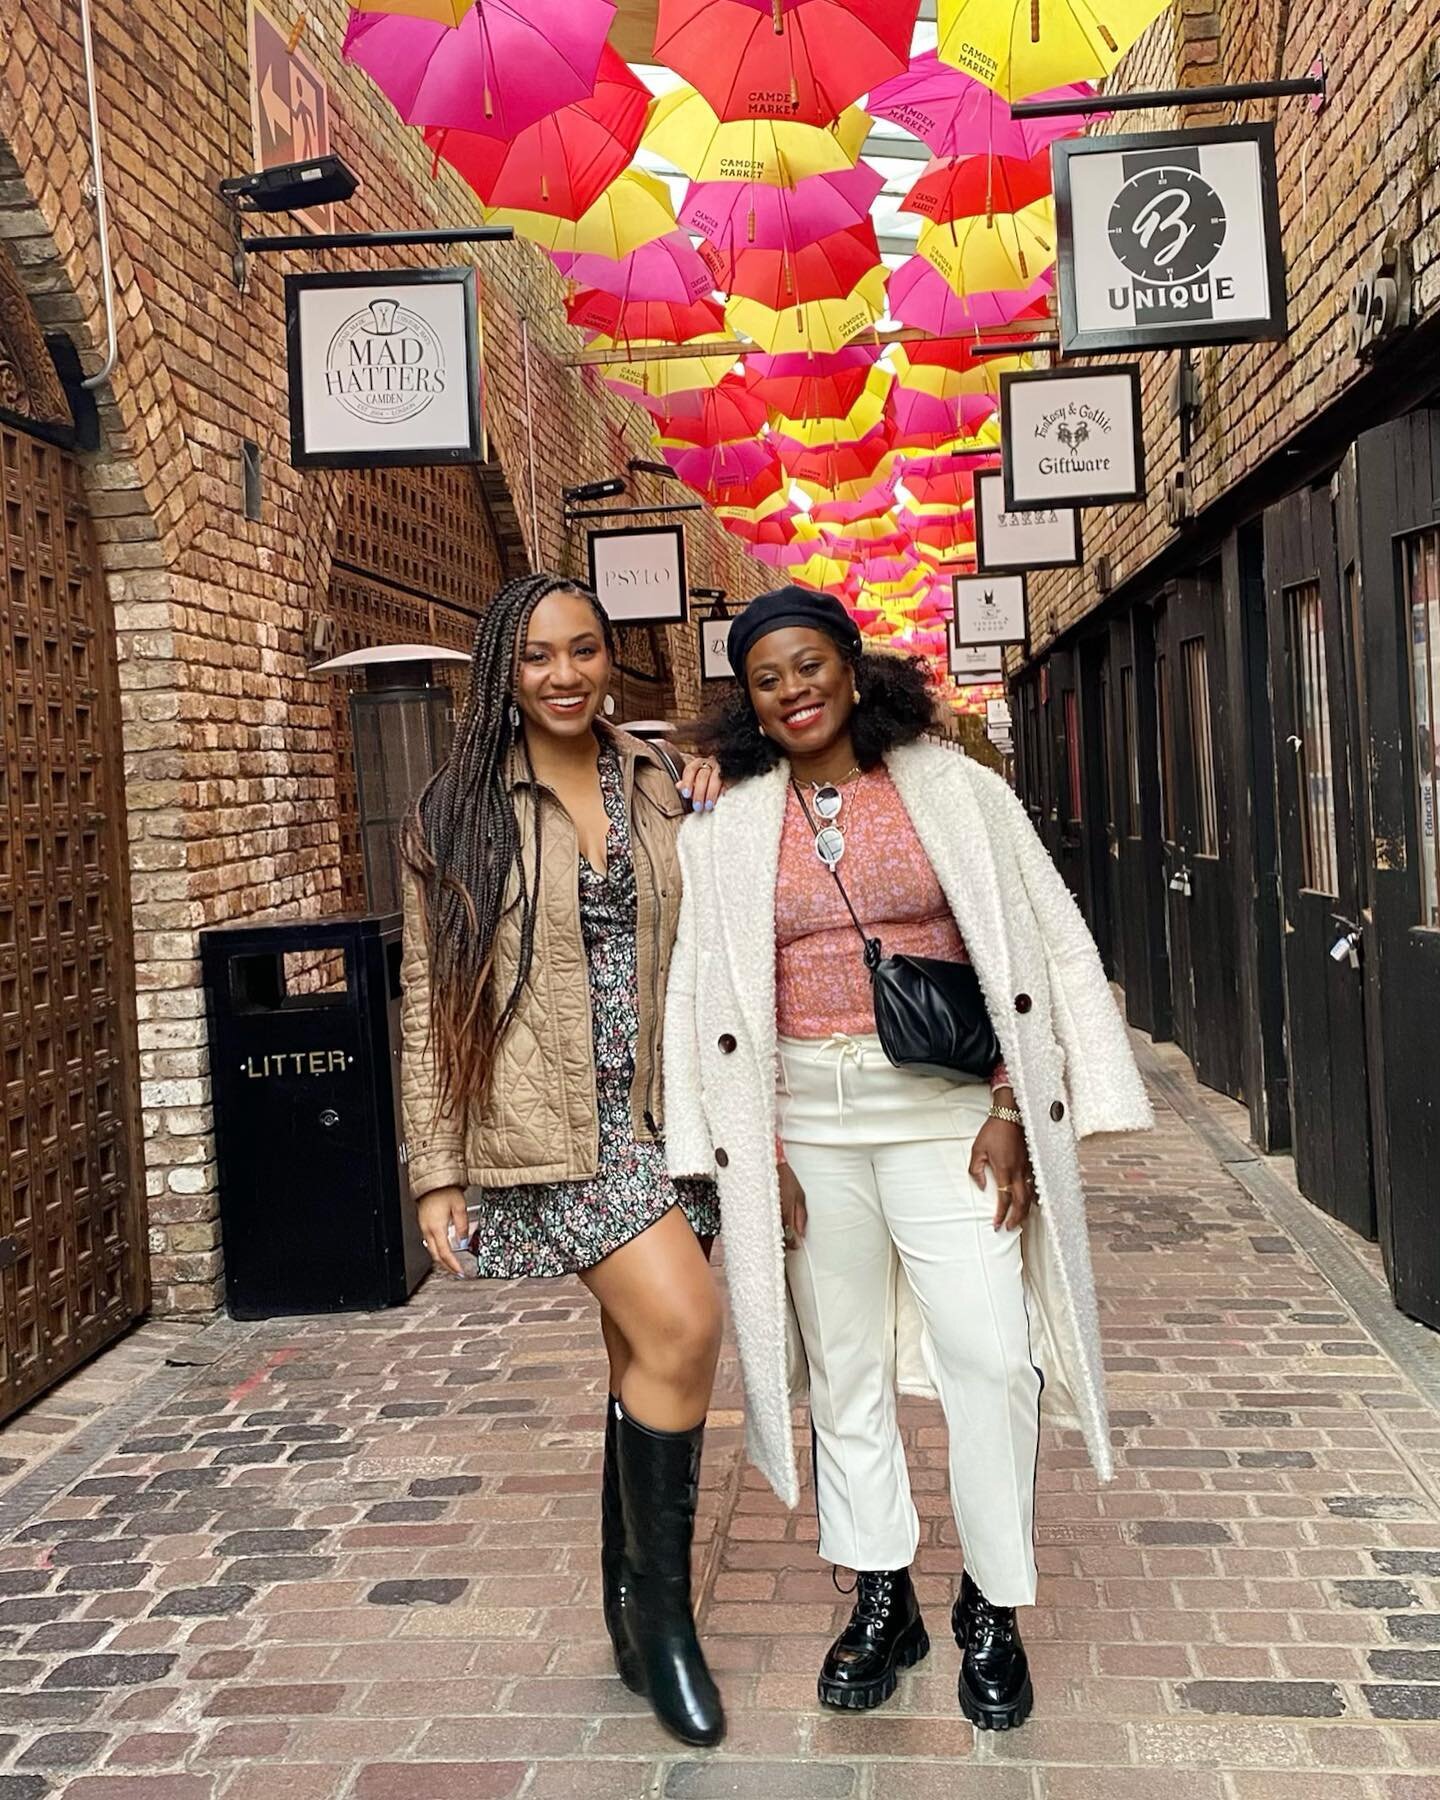 Welcome to Umbrella Street! ☂ 

Tucked away in Camden Market is this colourful, vibrant strip adorned with hanging brollies - installation art at its finest! 

This popular theme is somewhat of a global phenomenon - attracting tourists in heaps of ma